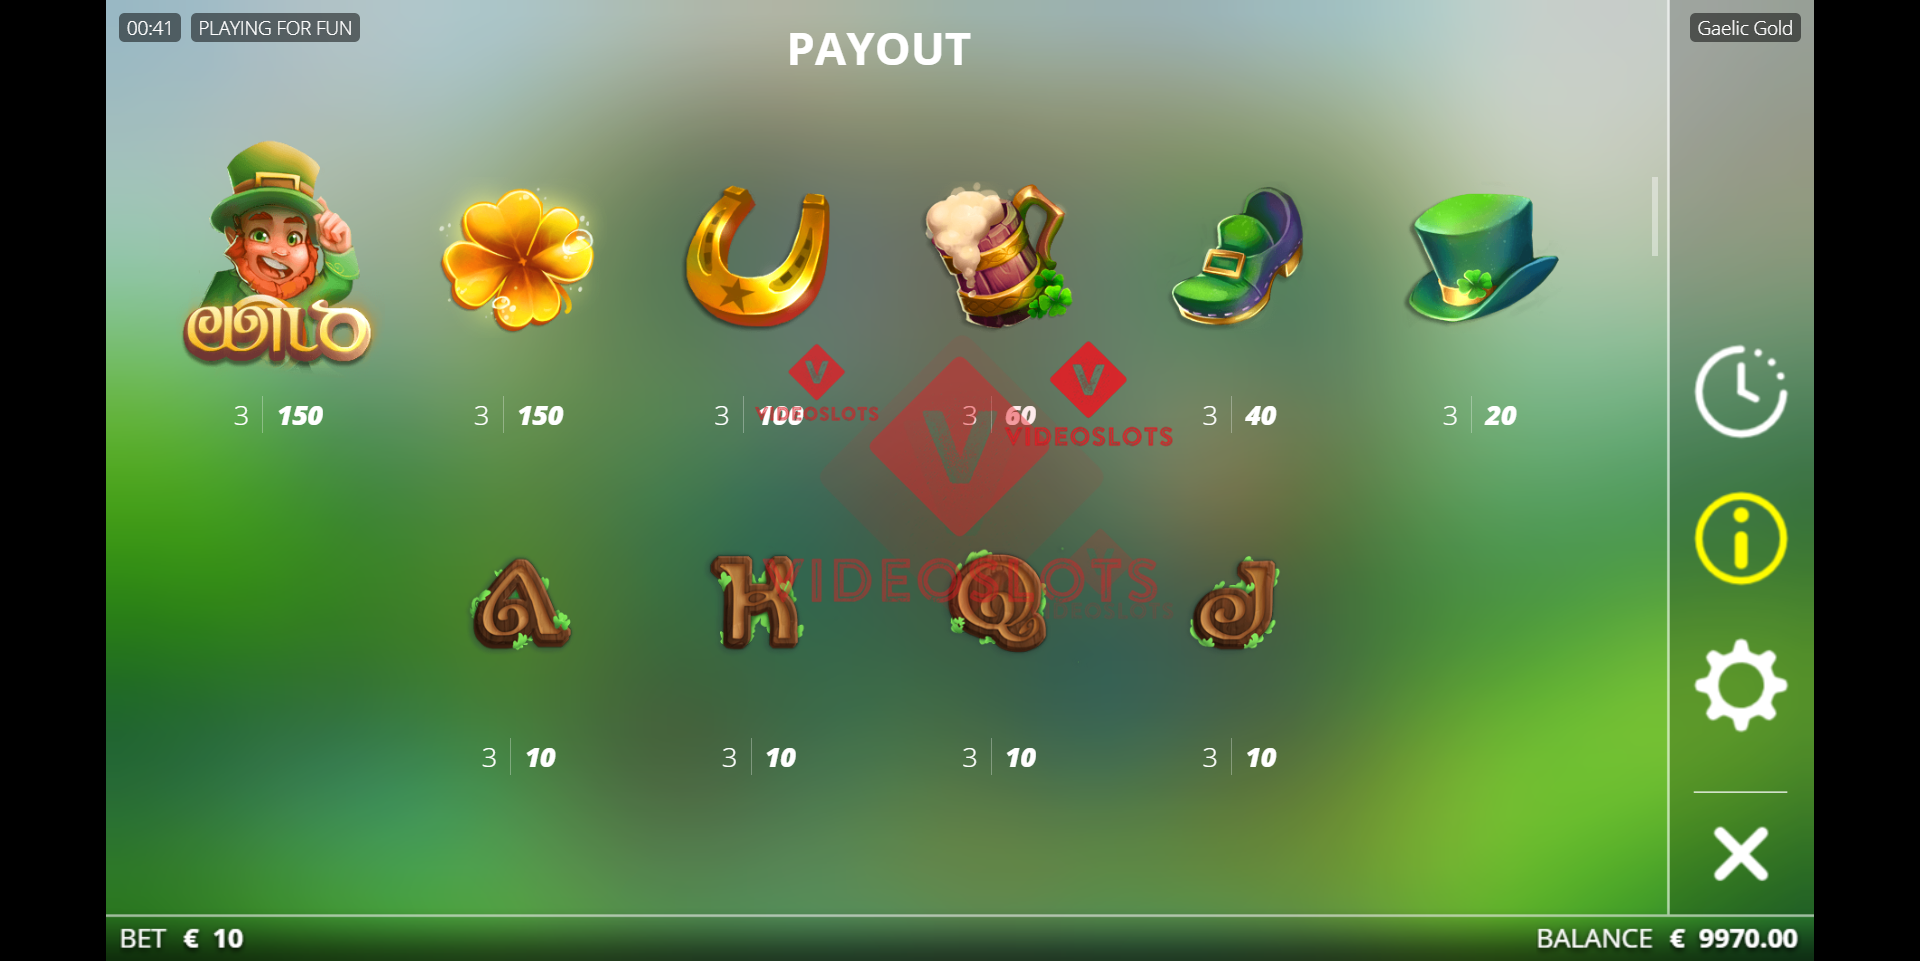 Pay Table for Gaelic Gold slot from NoLimit City